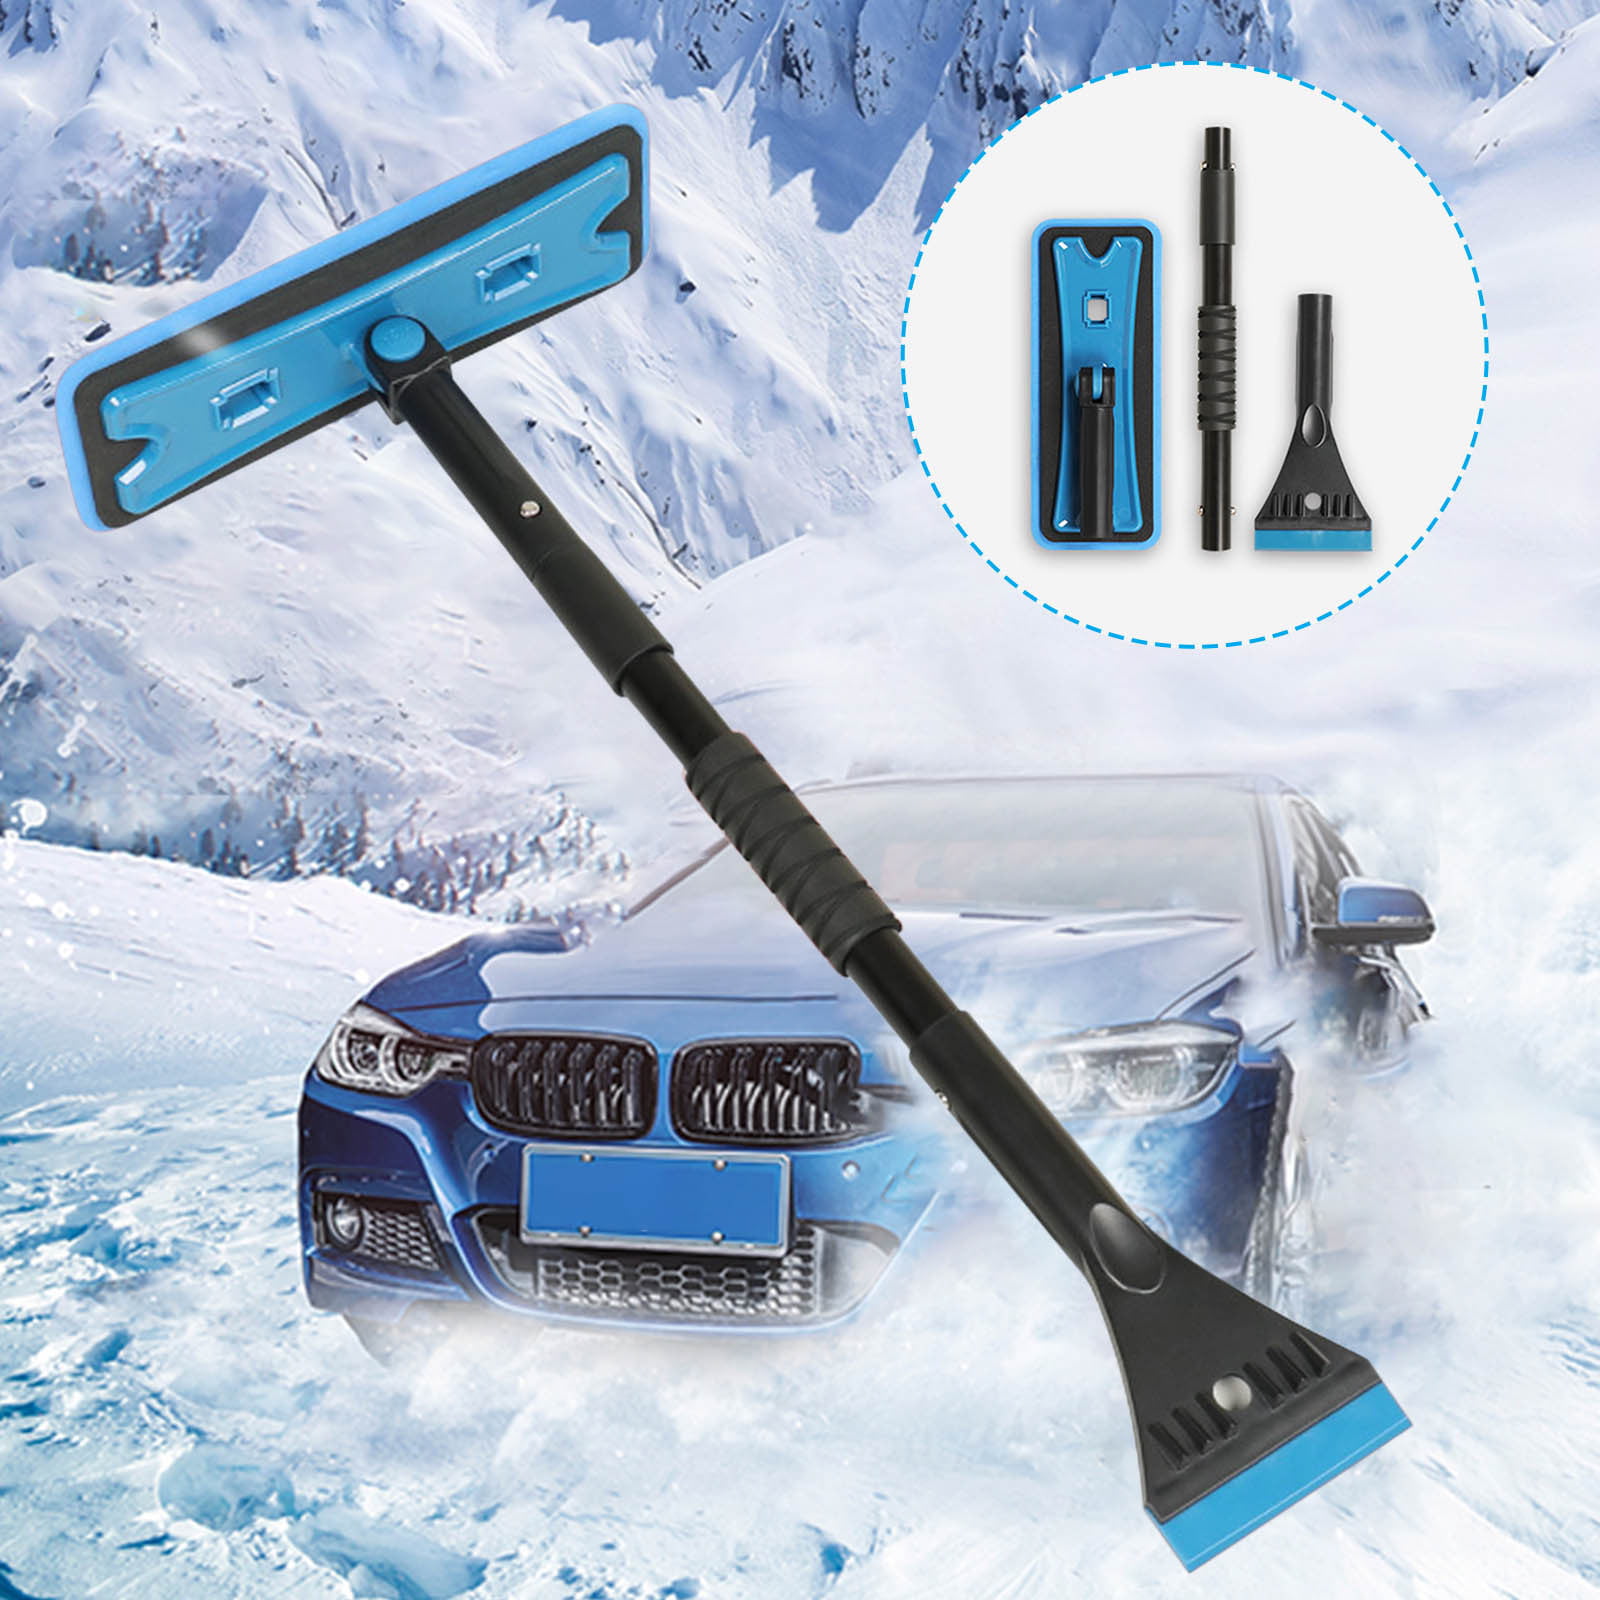  SEG Direct 50 Extendable Snow Brush Ice Scraper Combination  with Foam Grip Handle Auto Window Windshield Snow Removal Tool for Car SUV  RV Truck, Black and Blue : Automotive